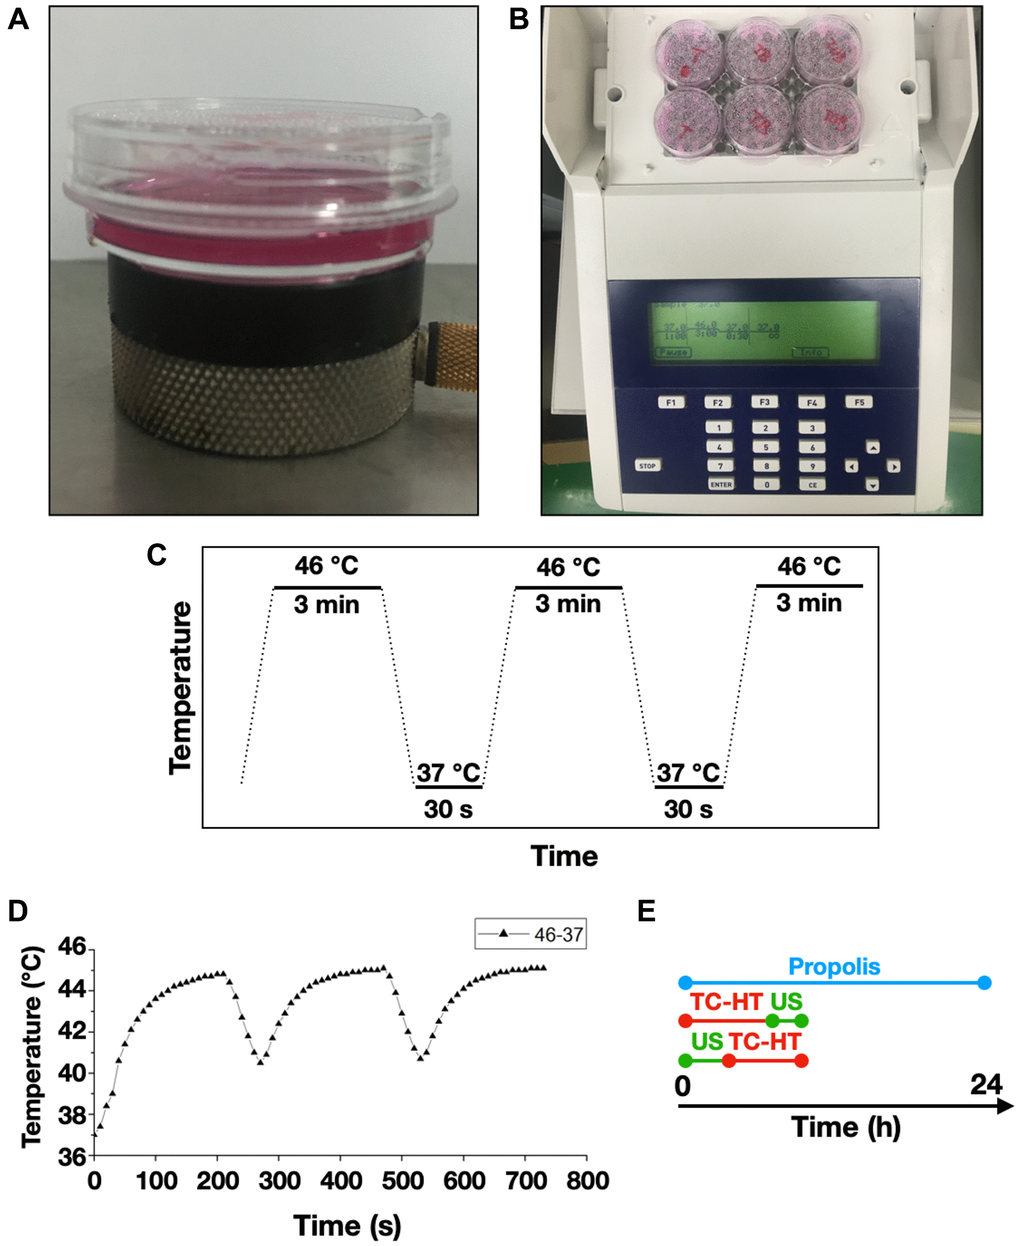 Experimental setups for the triple treatment. 35-mm culture dishes were placed on (A) a ceramic transducer and (B) a modified PCR machine for the exposures of US and TC-HT, respectively. (C) The schematic representation of the TC-HT temperature settings. (D) Cell temperature detected by a needle thermocouple when TC-HT was implemented. (E) Experimental schedule of the triple treatment with different exposing order of US and TC-HT.